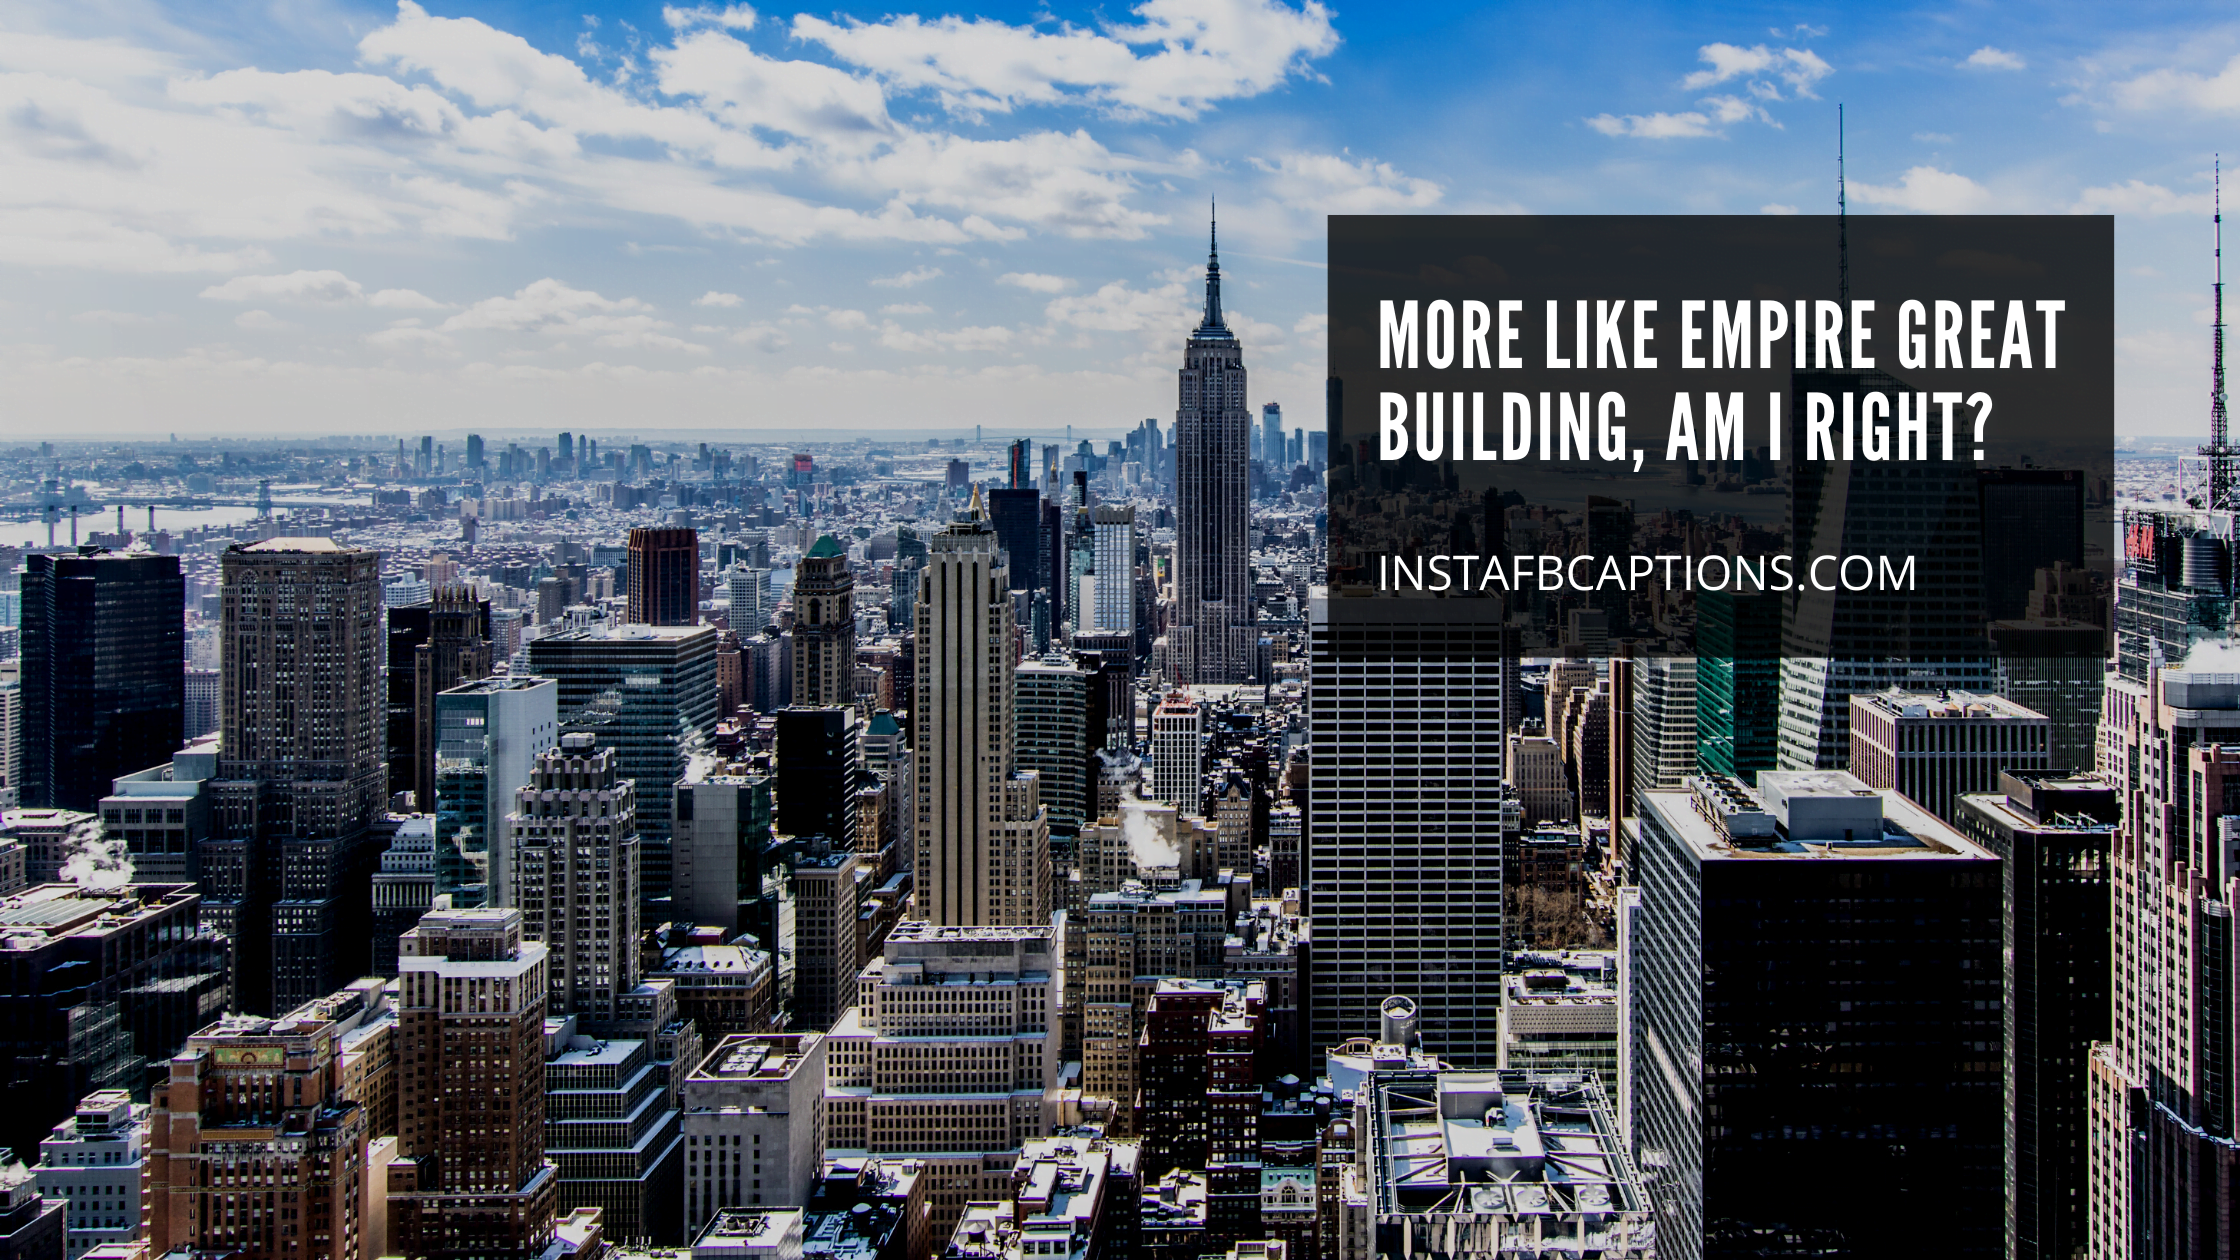 Amusing Empire State Building Puns And Funny Captions  - Amusing Empire State Building Puns and Funny Captions  - 101 Empire State Building Instagram Captions Quotes Hashtags in 2023